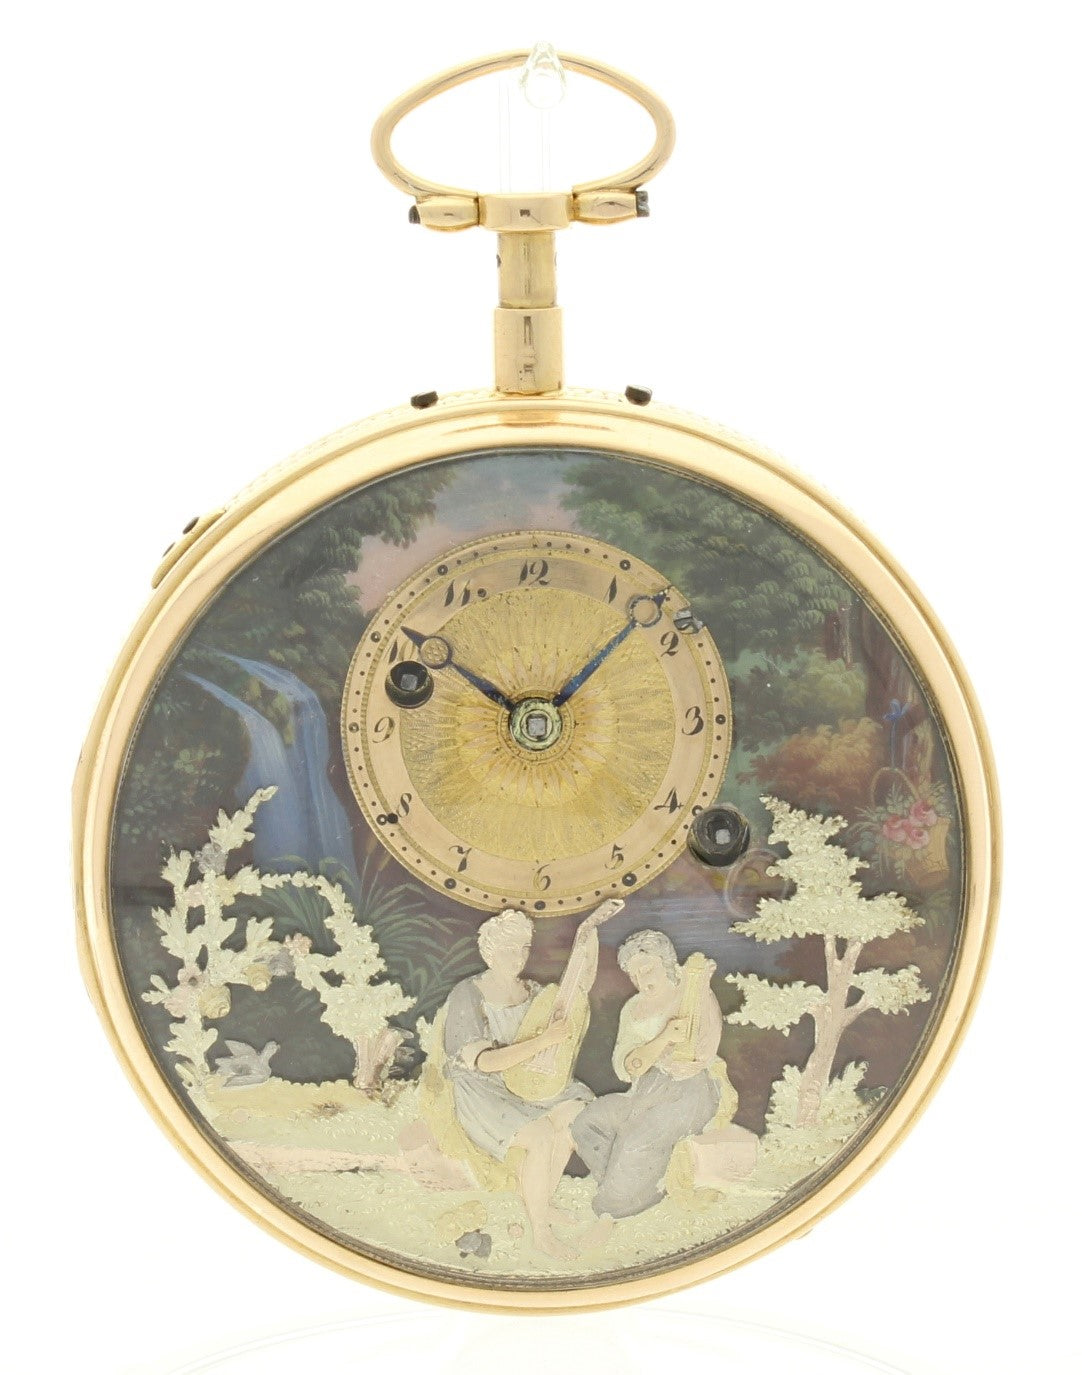 Erotic Automation Pocketwatch: Multi-coloured gold and enamel quarter repeating automation watch with musical movement and concealed erotic automation by Henri Capt c. 1810